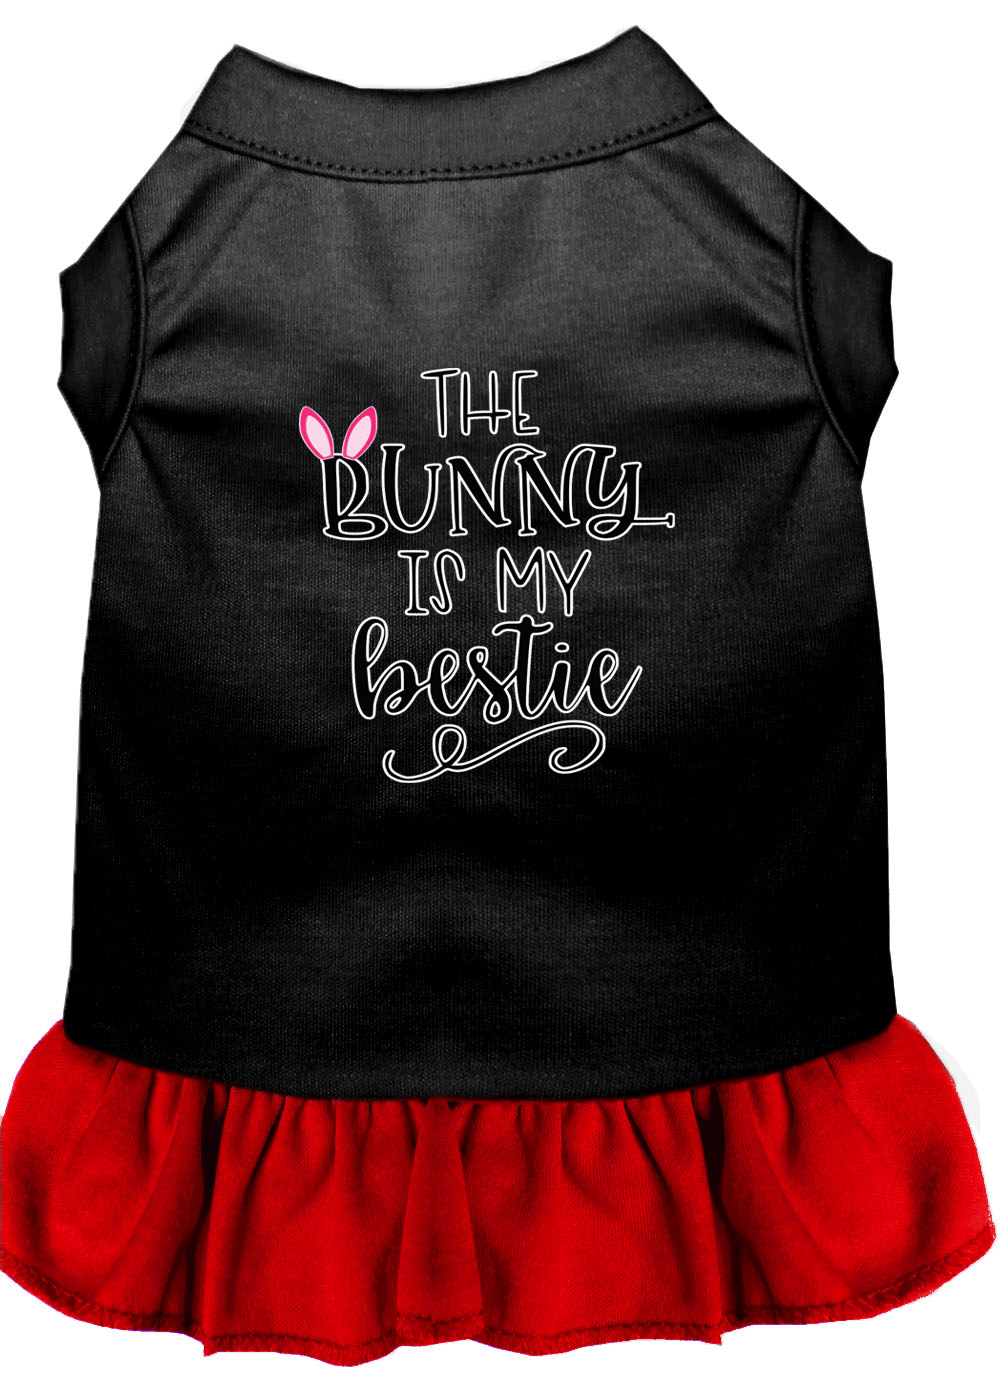 Bunny is my Bestie Screen Print Dog Dress Black with Red Lg